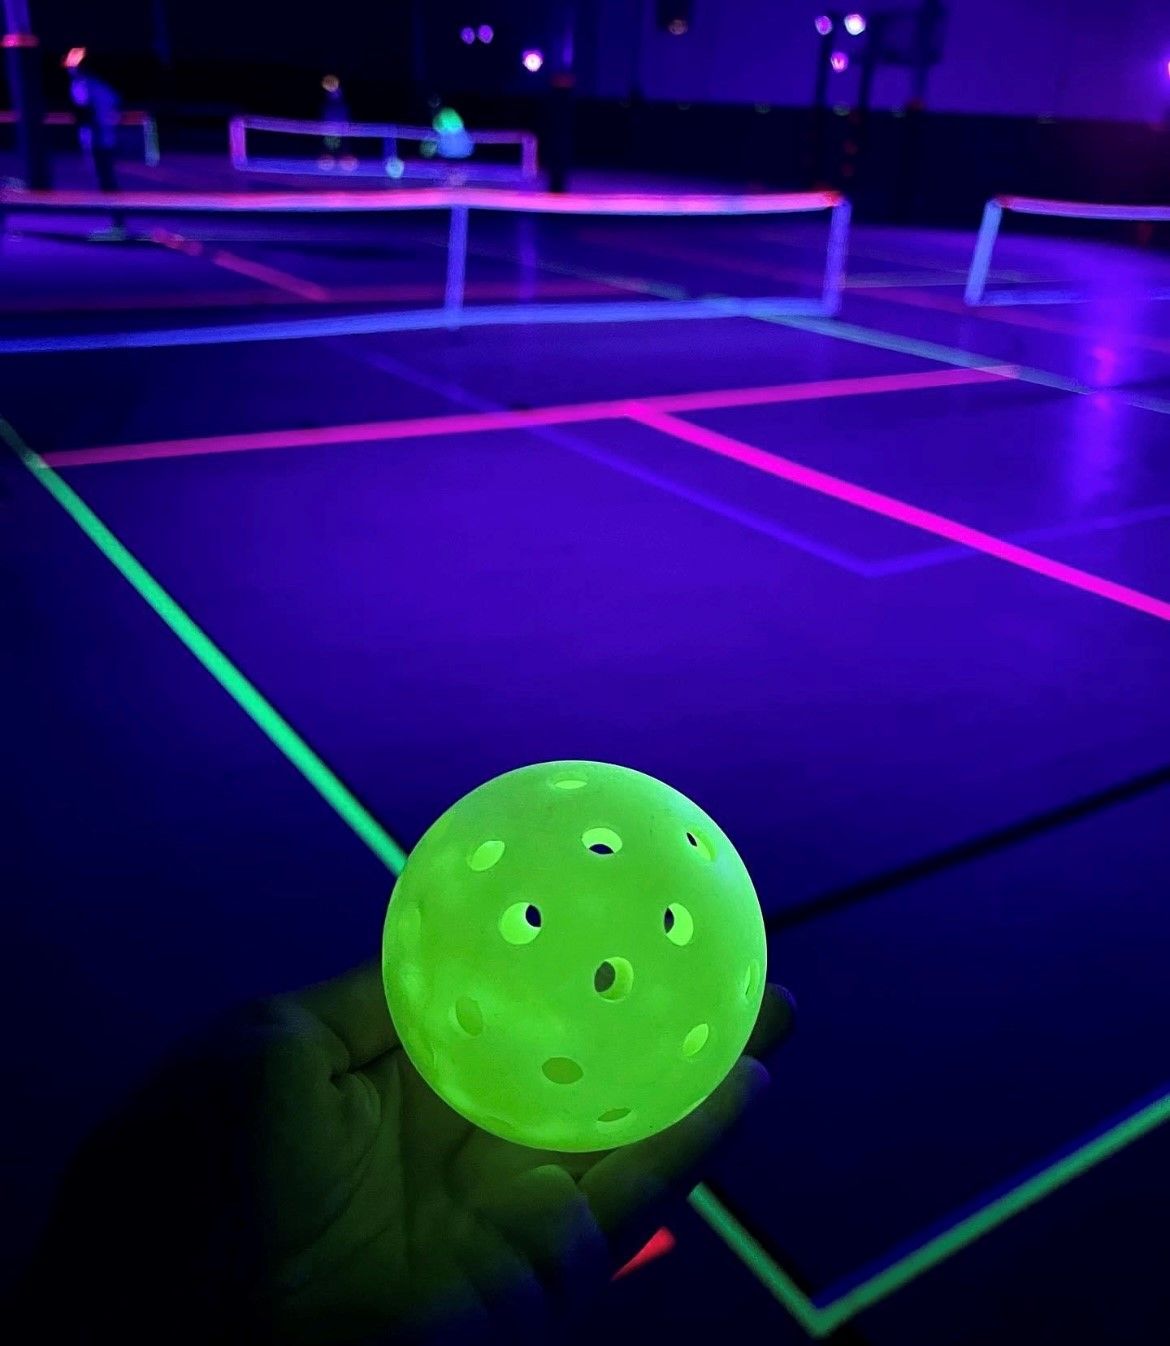 Tennis Player Threatens to Call Police On Pickleball Players in Nashville